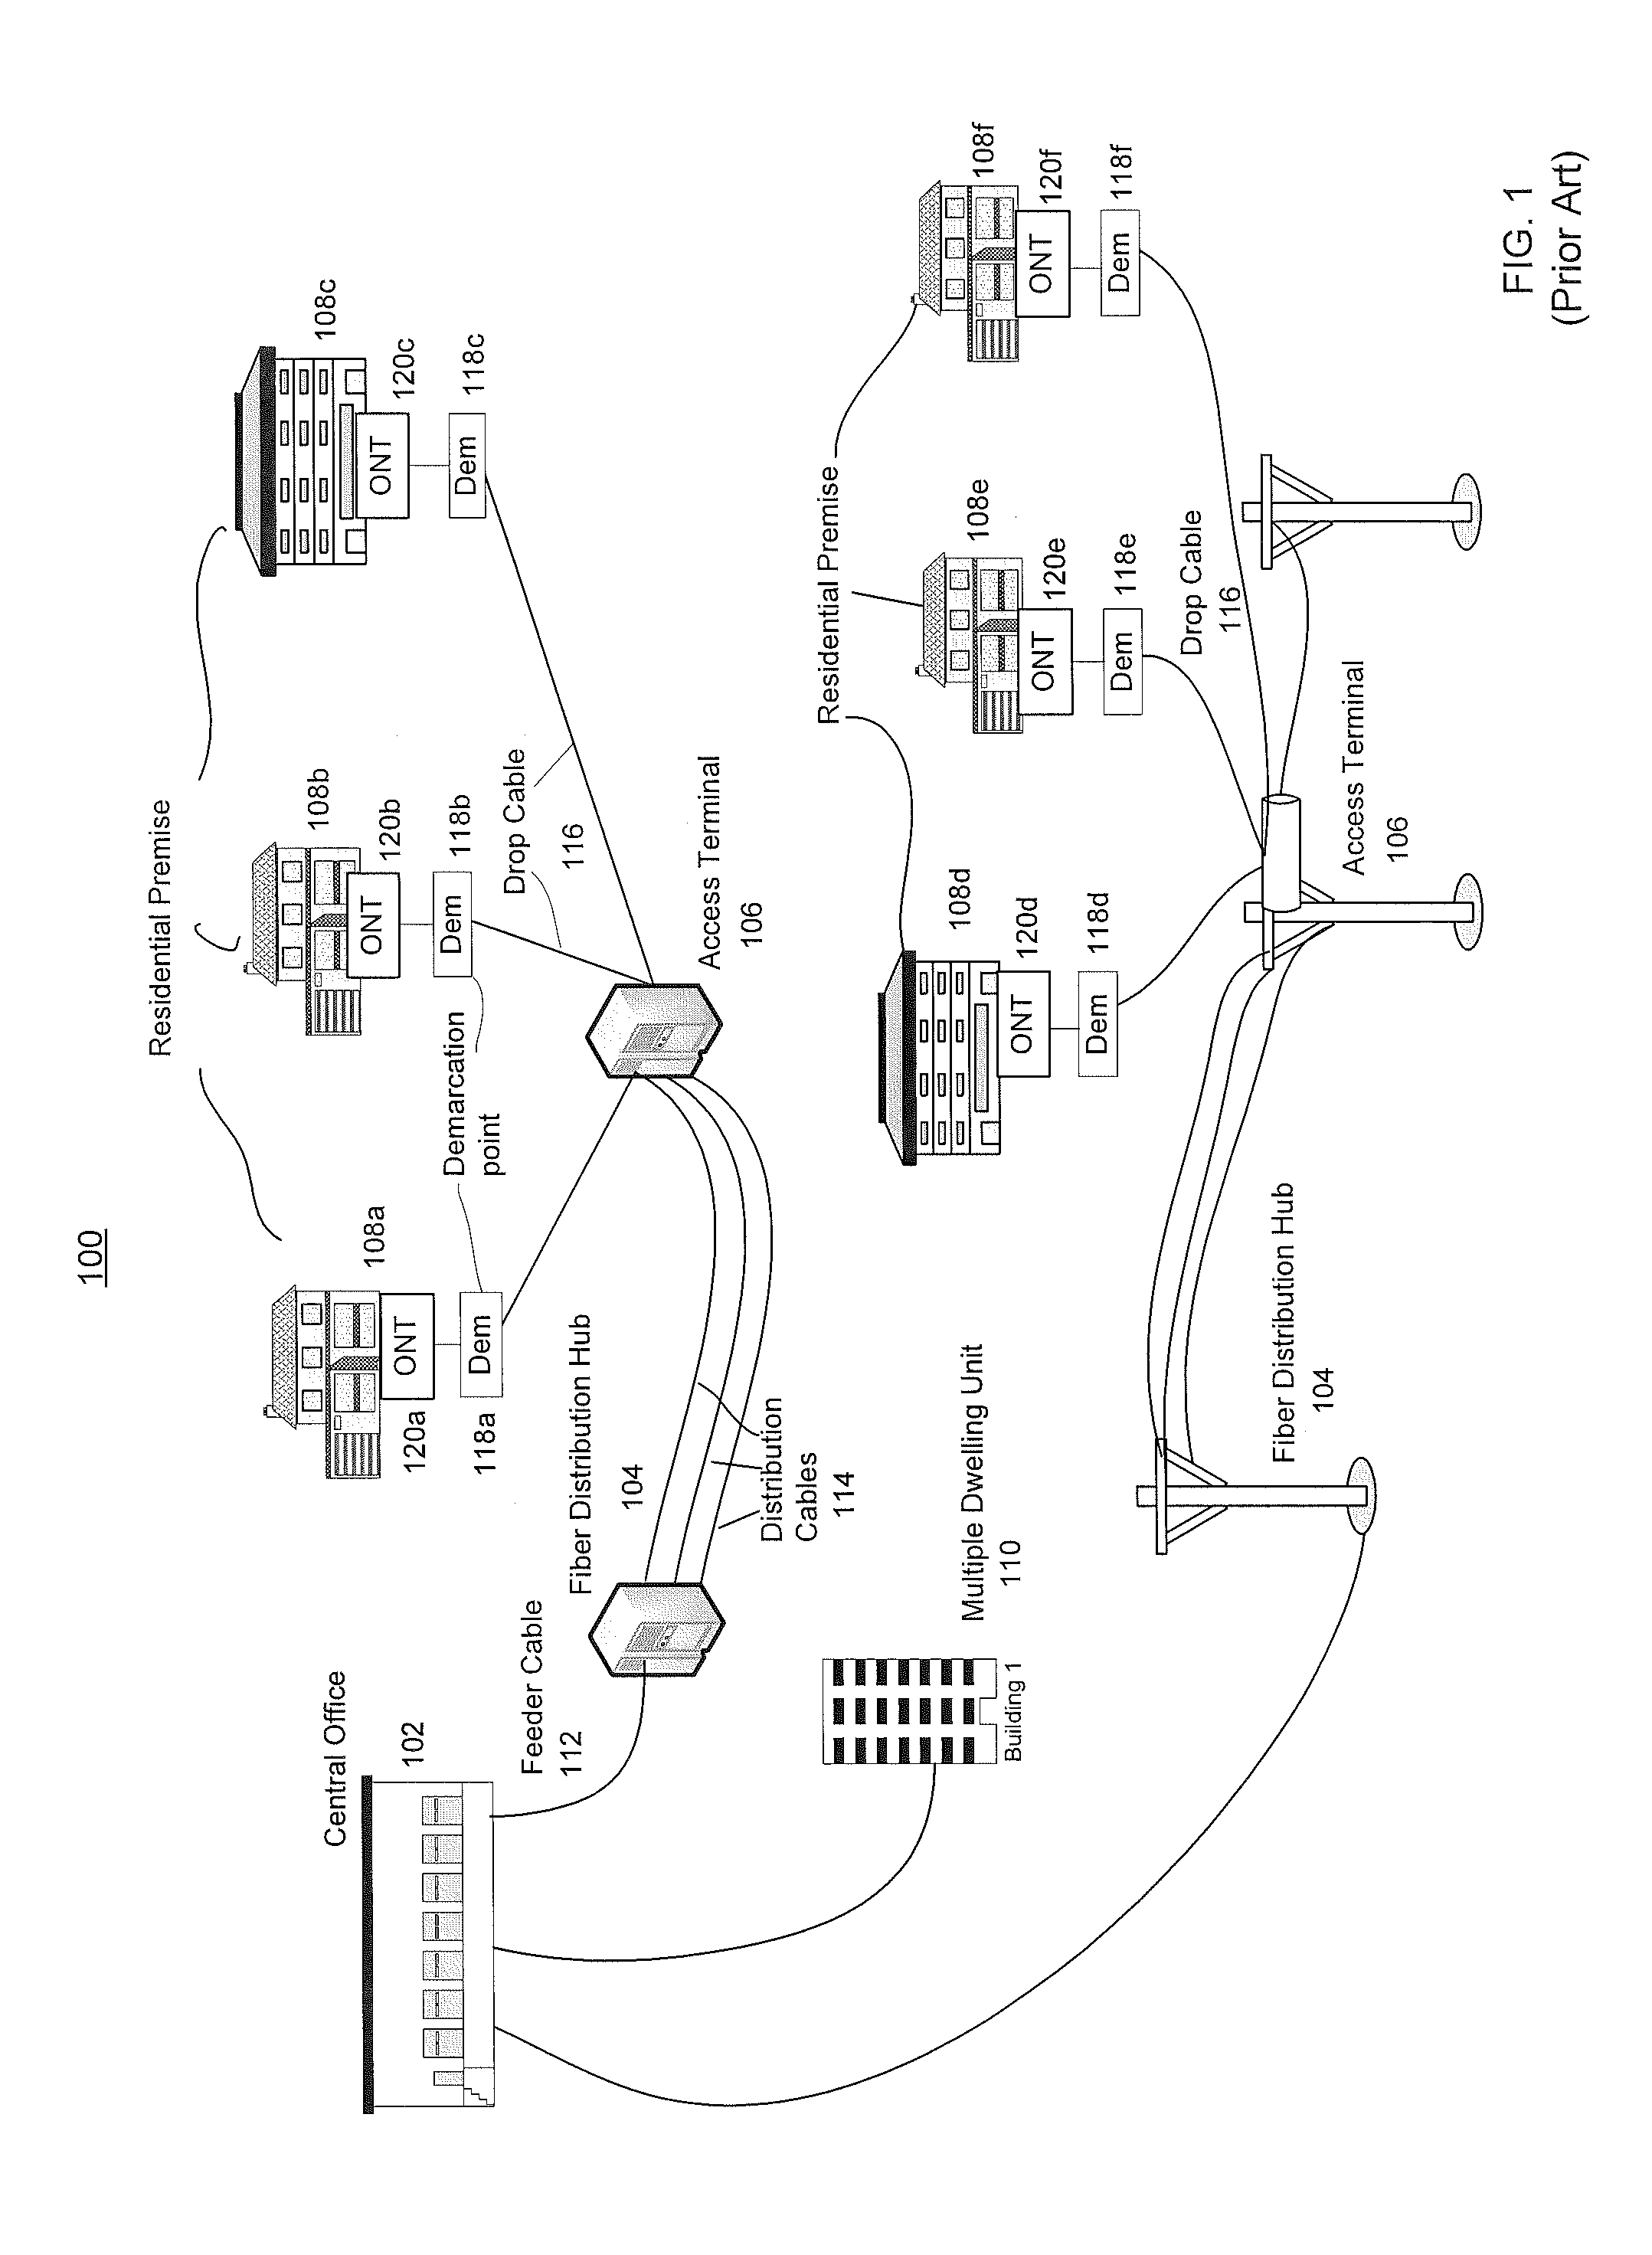 Cable edging systems and methods